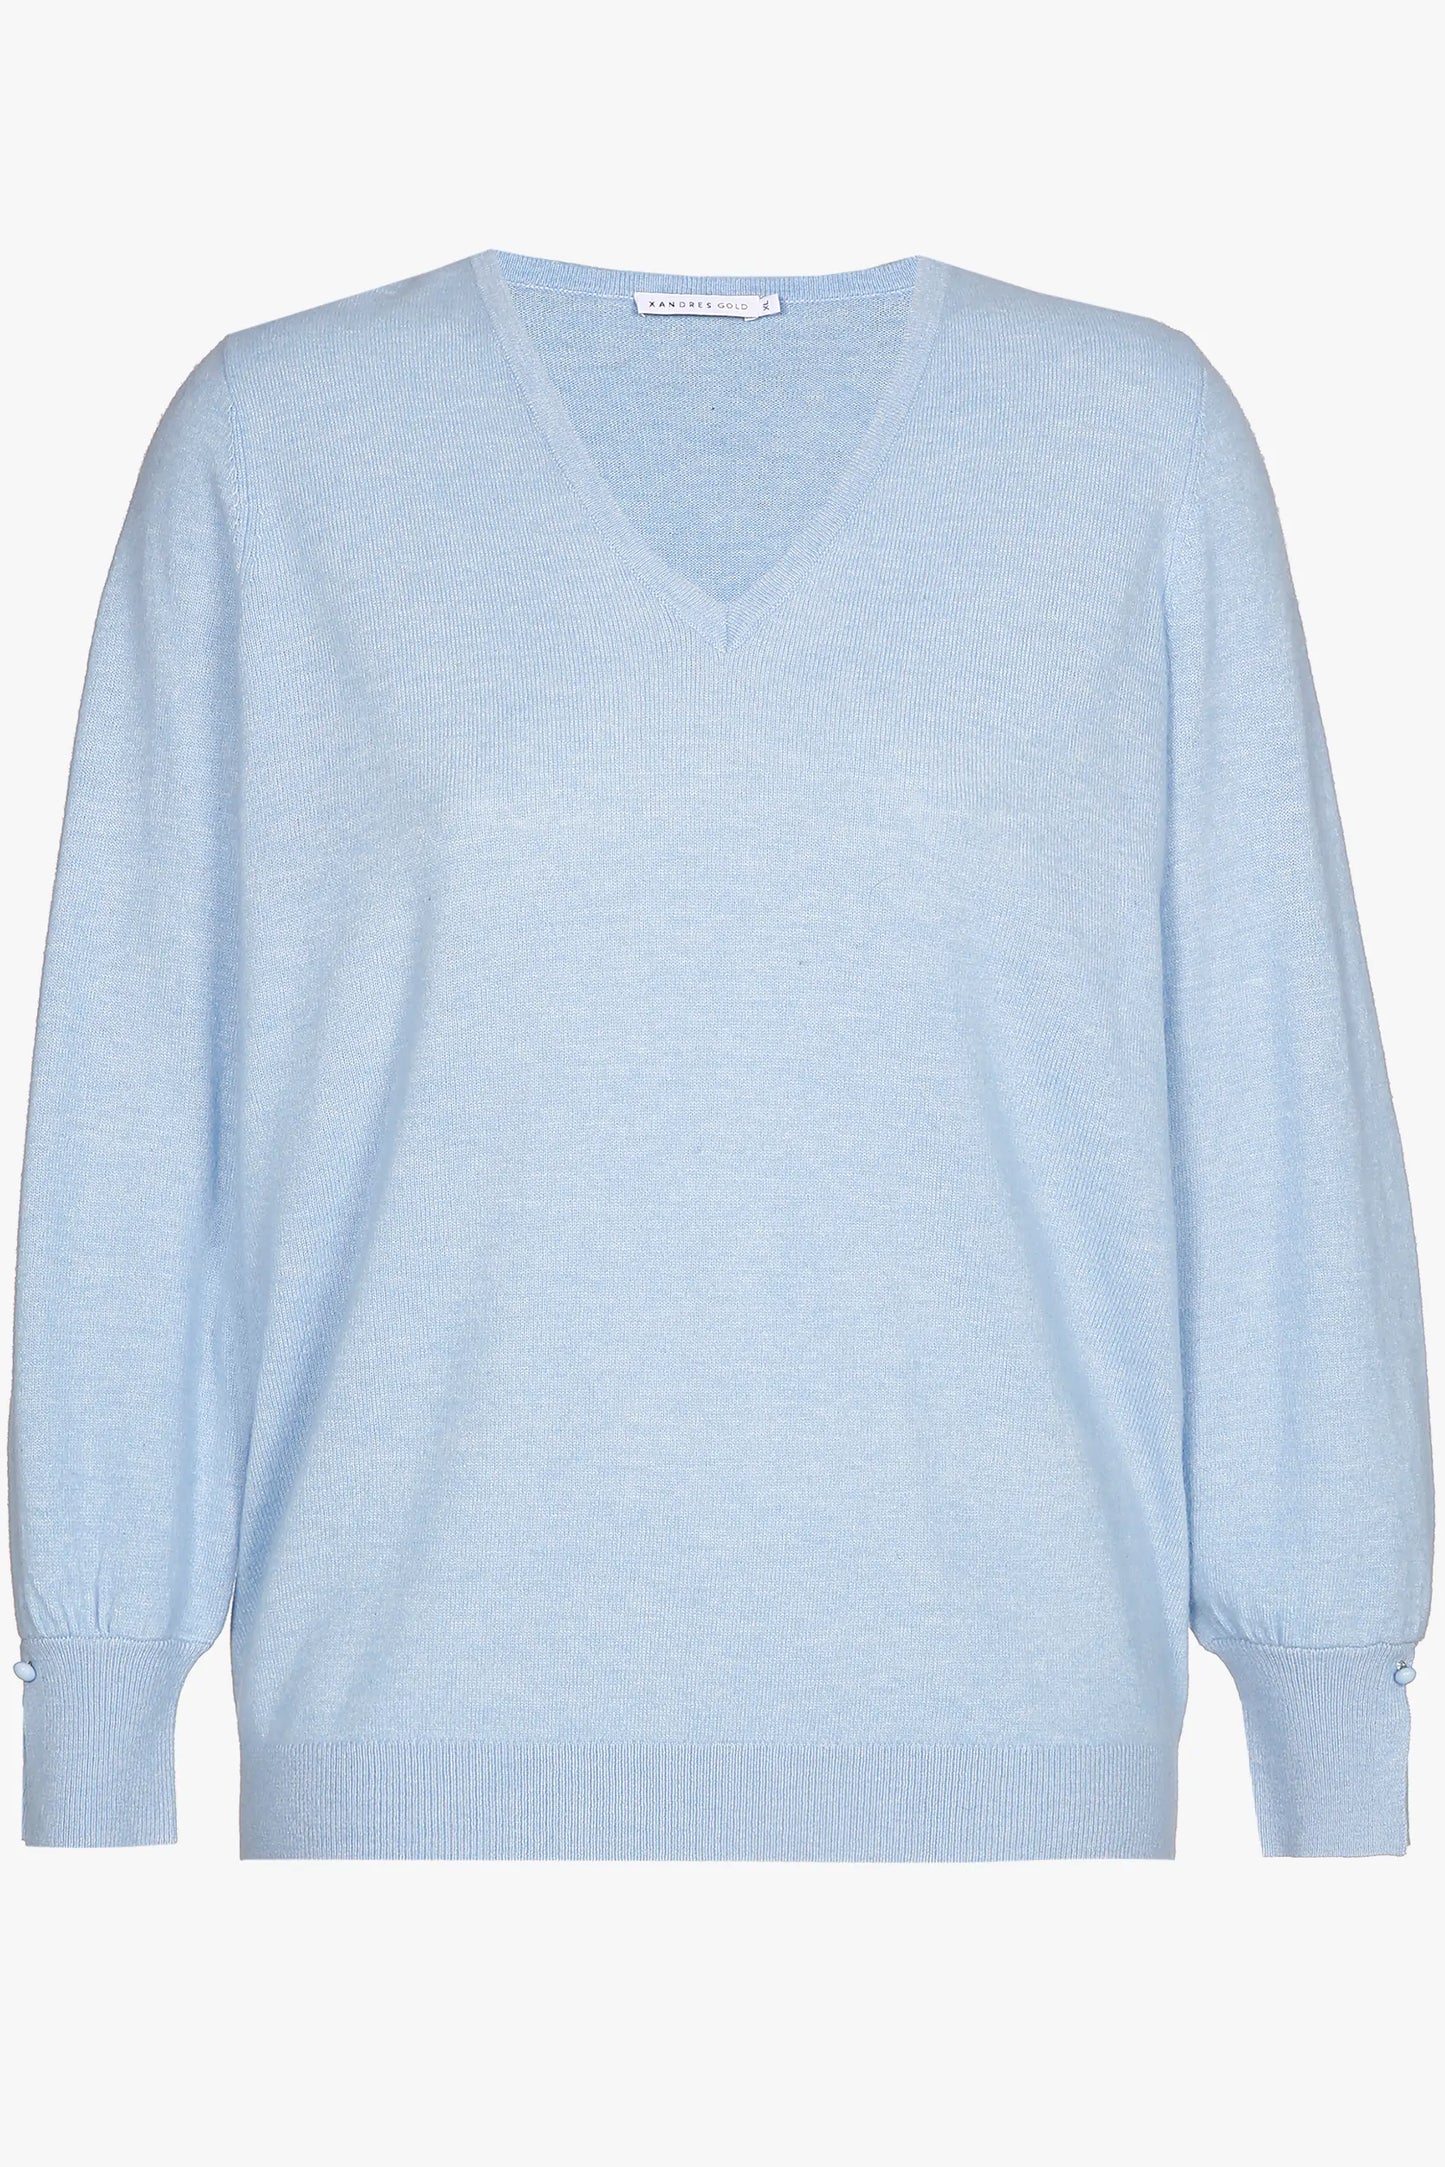 Suze - Luxurious Wool and Cashmere Blend Sweater